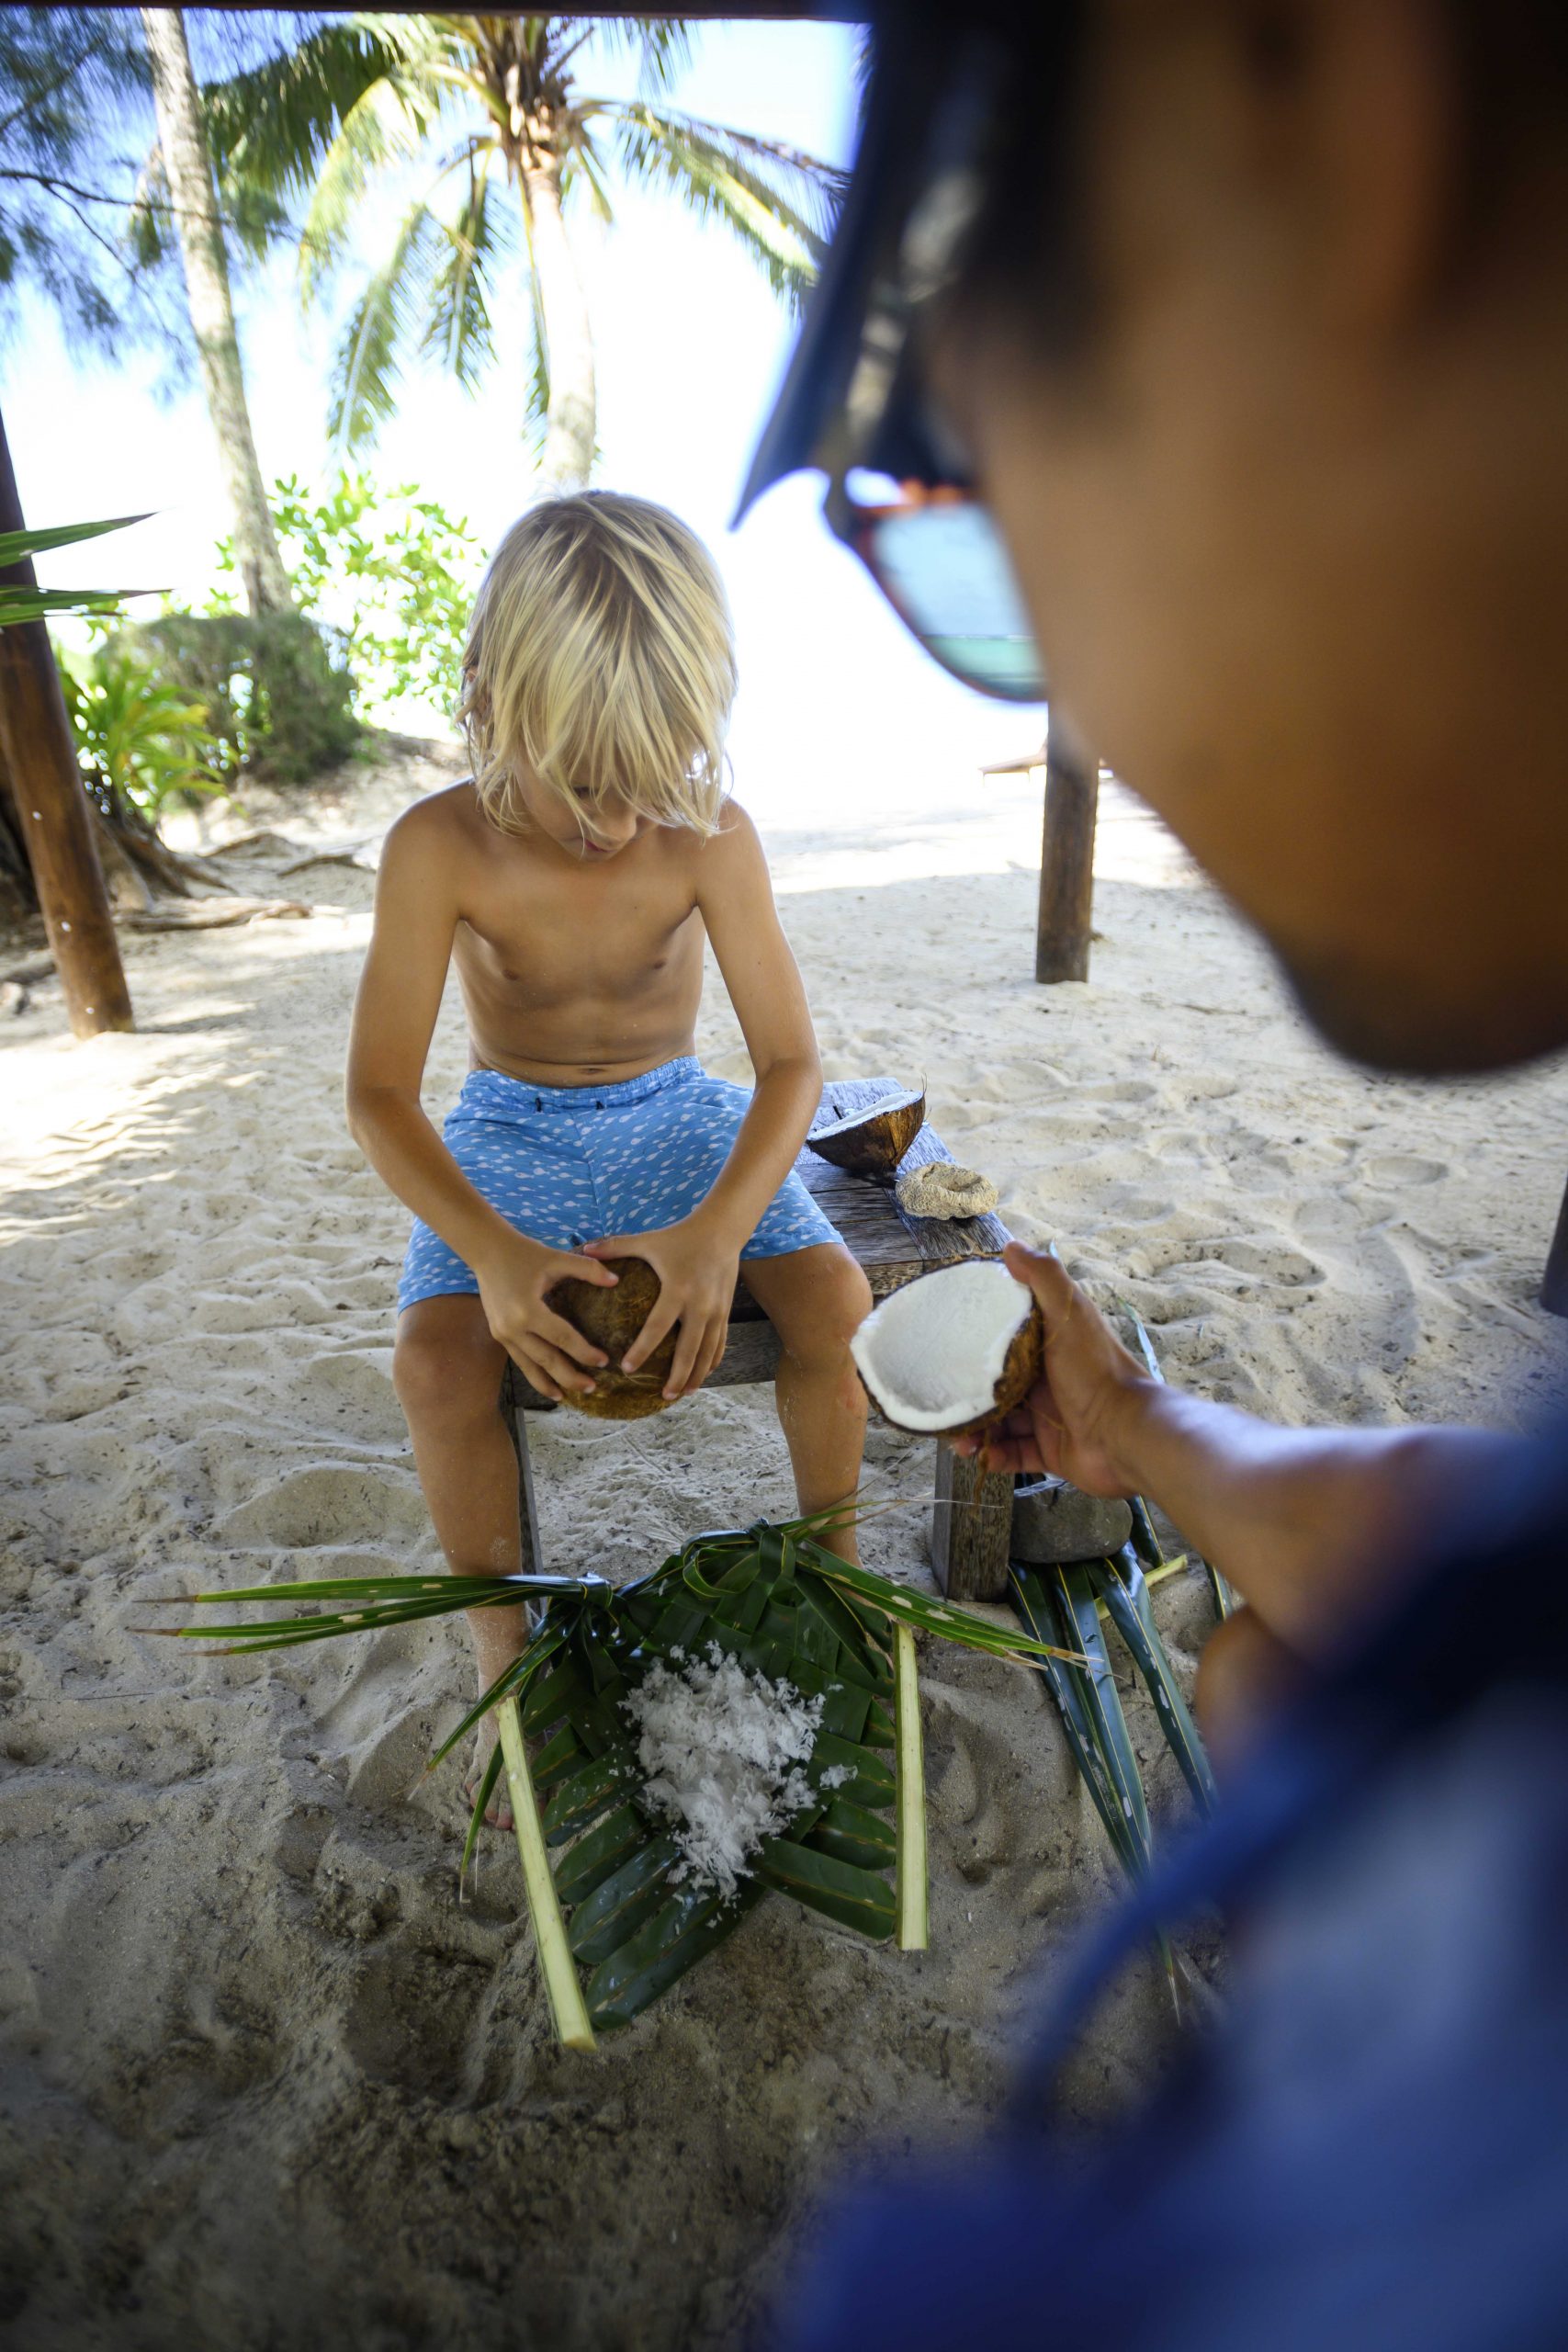 Supervised coconut grating by the beach, performed by a young boy with the help of the Resort Attendant